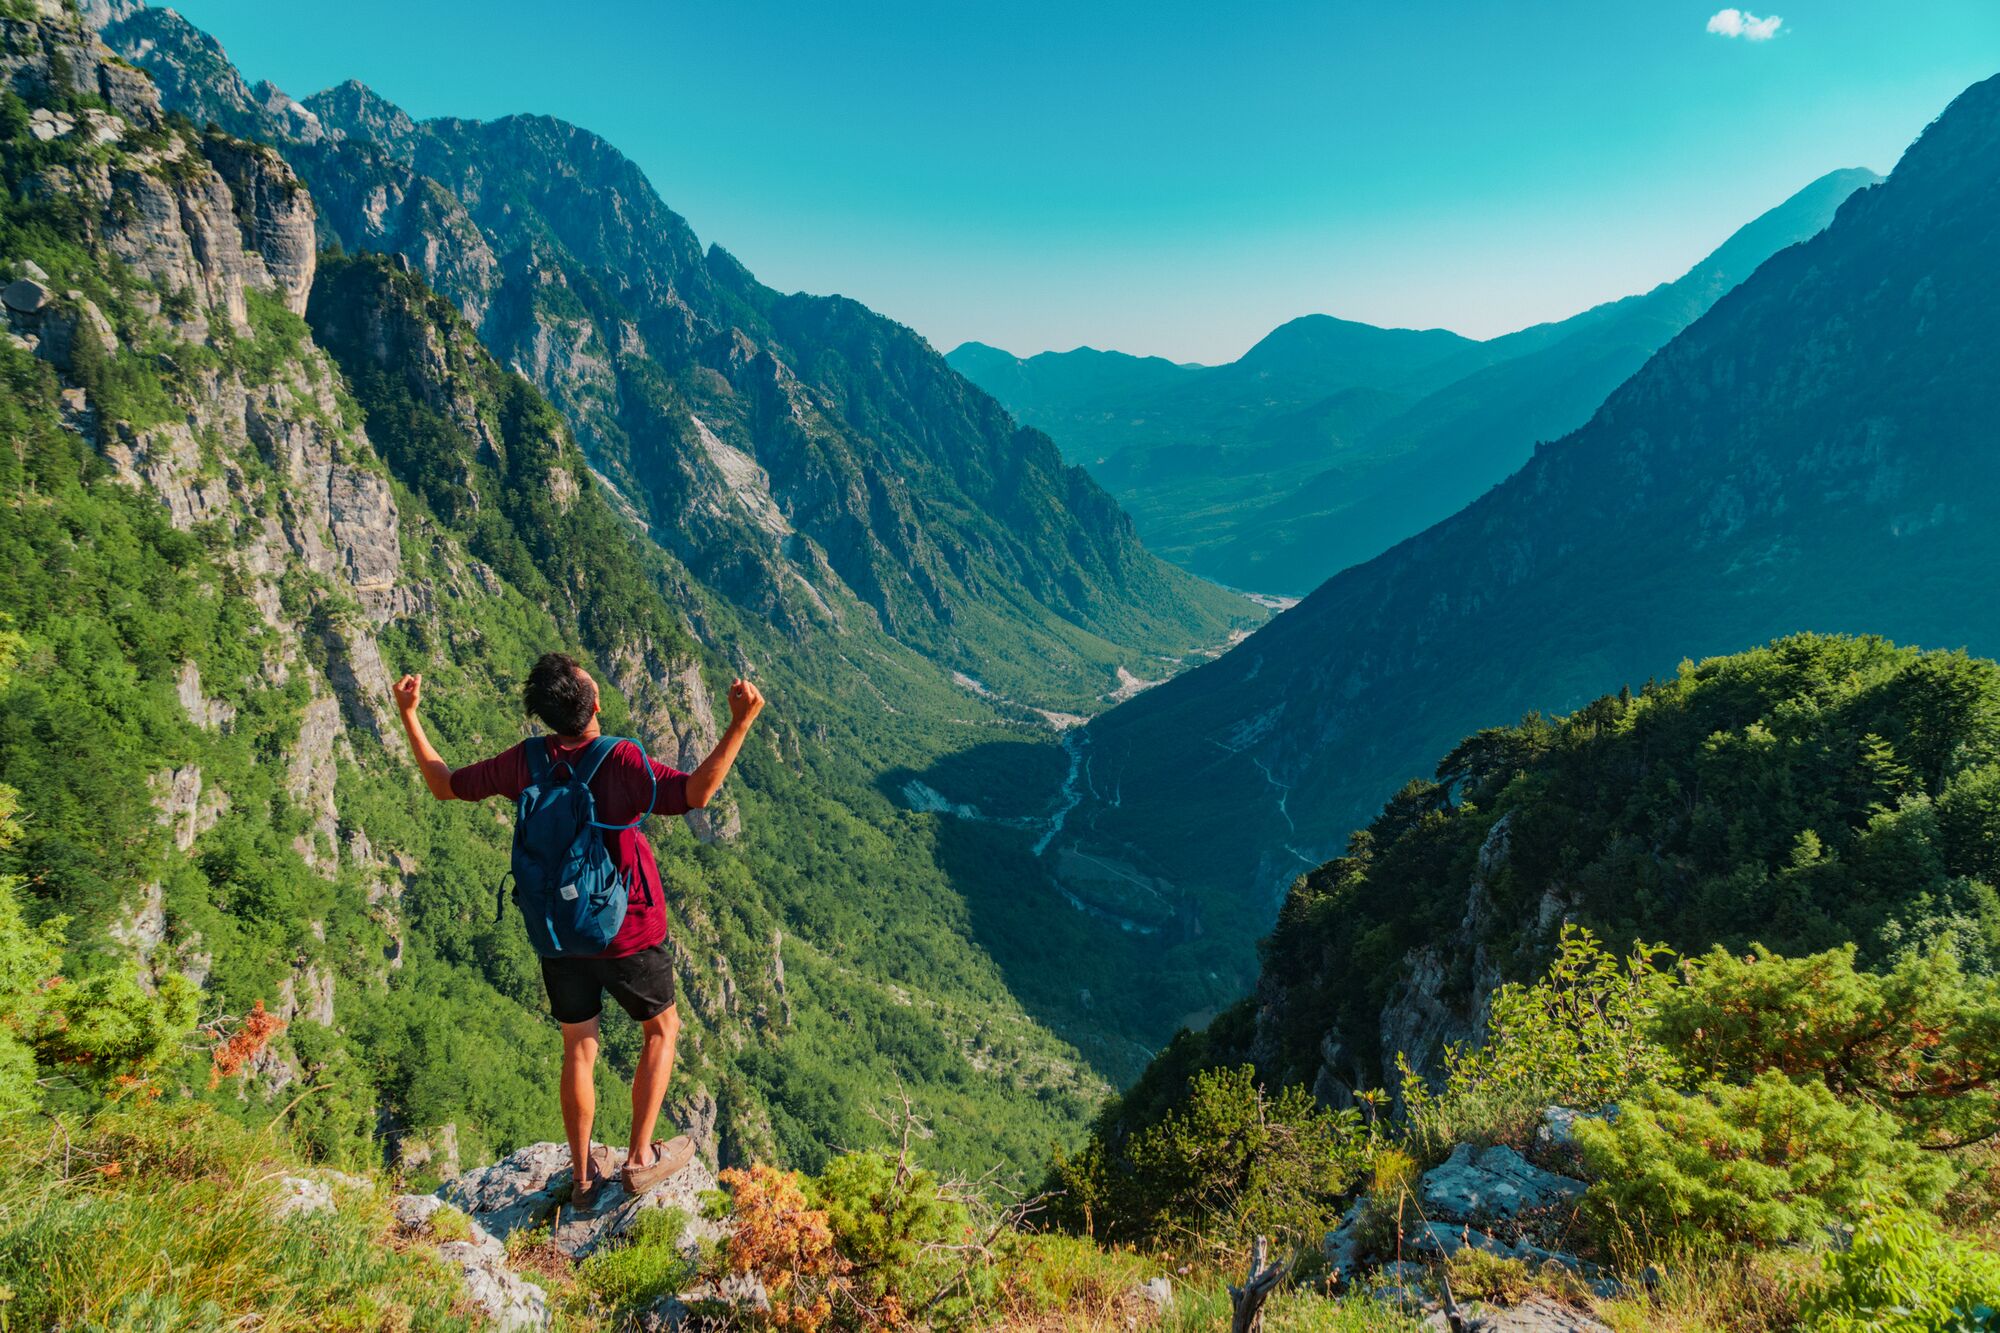 7 things you didn't know you could do in Albania